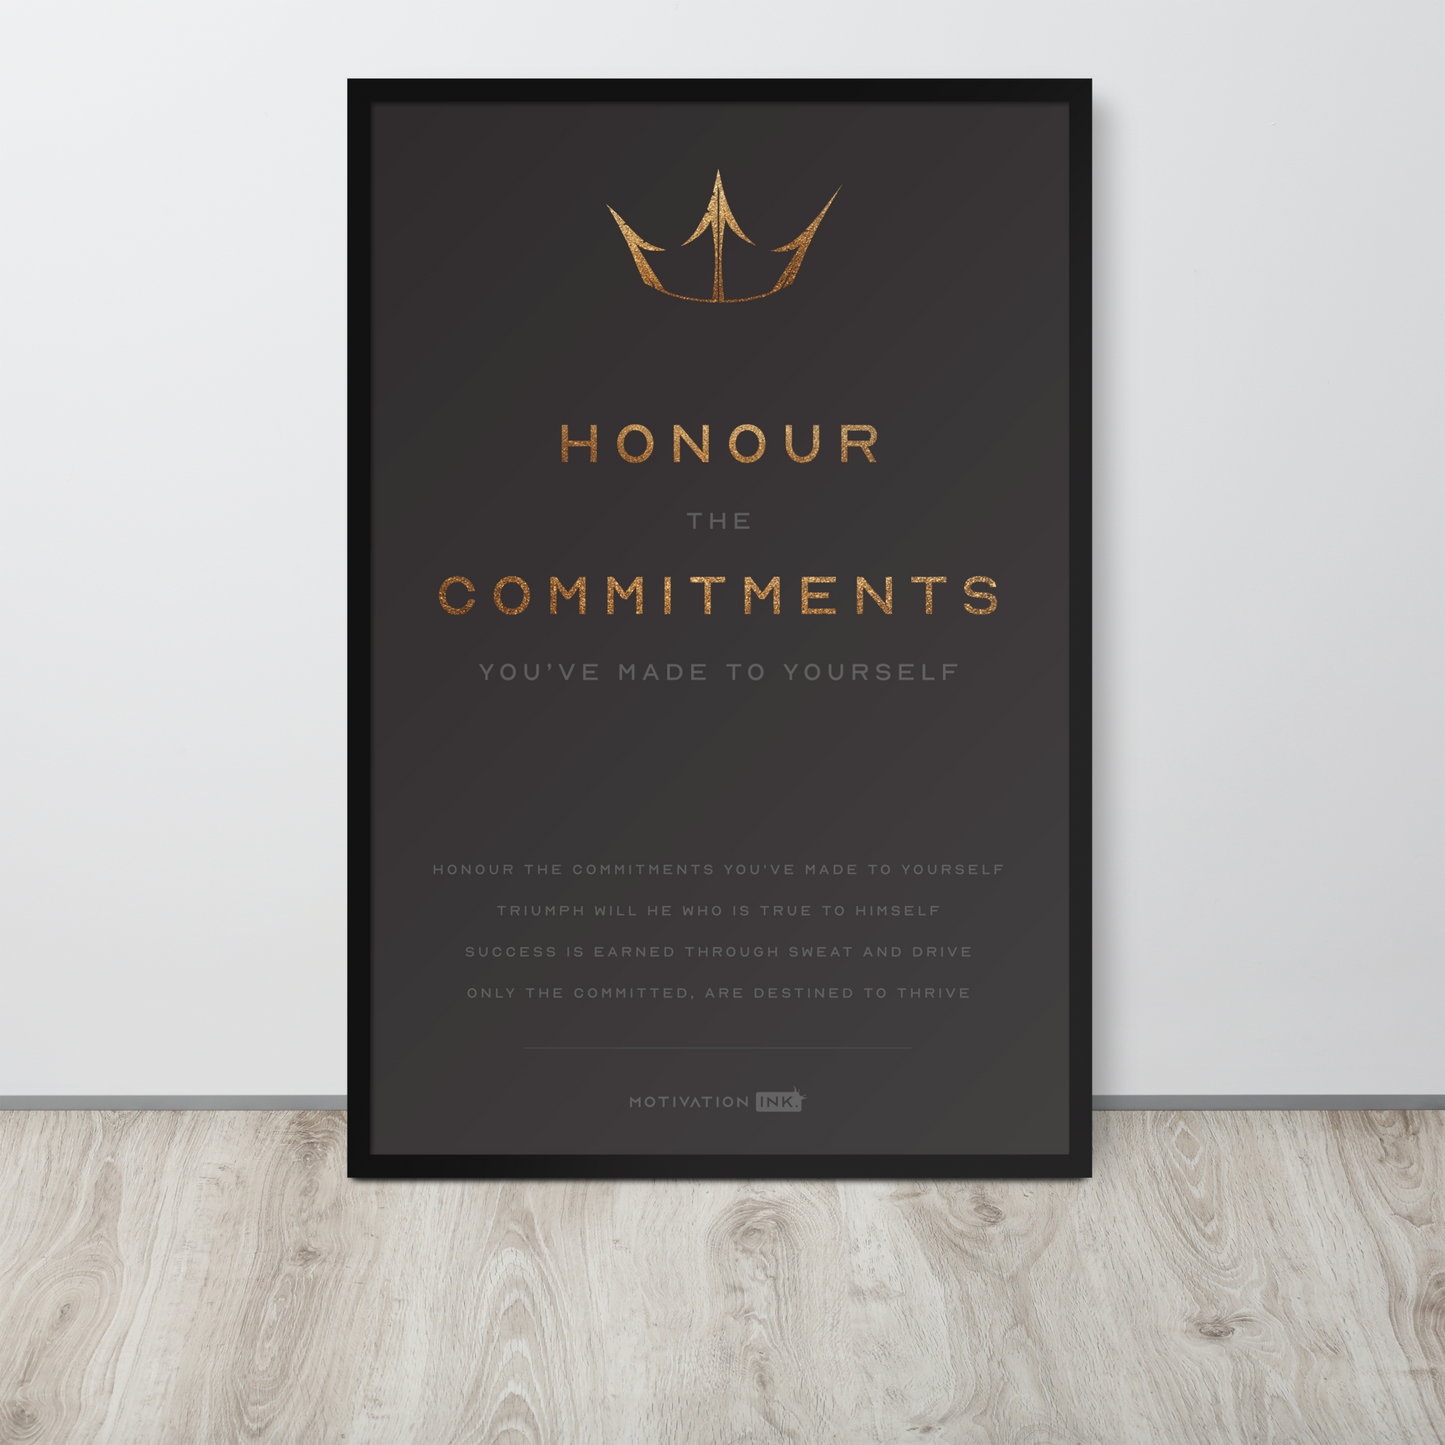 Honour The Commitments You've Made To Yourself